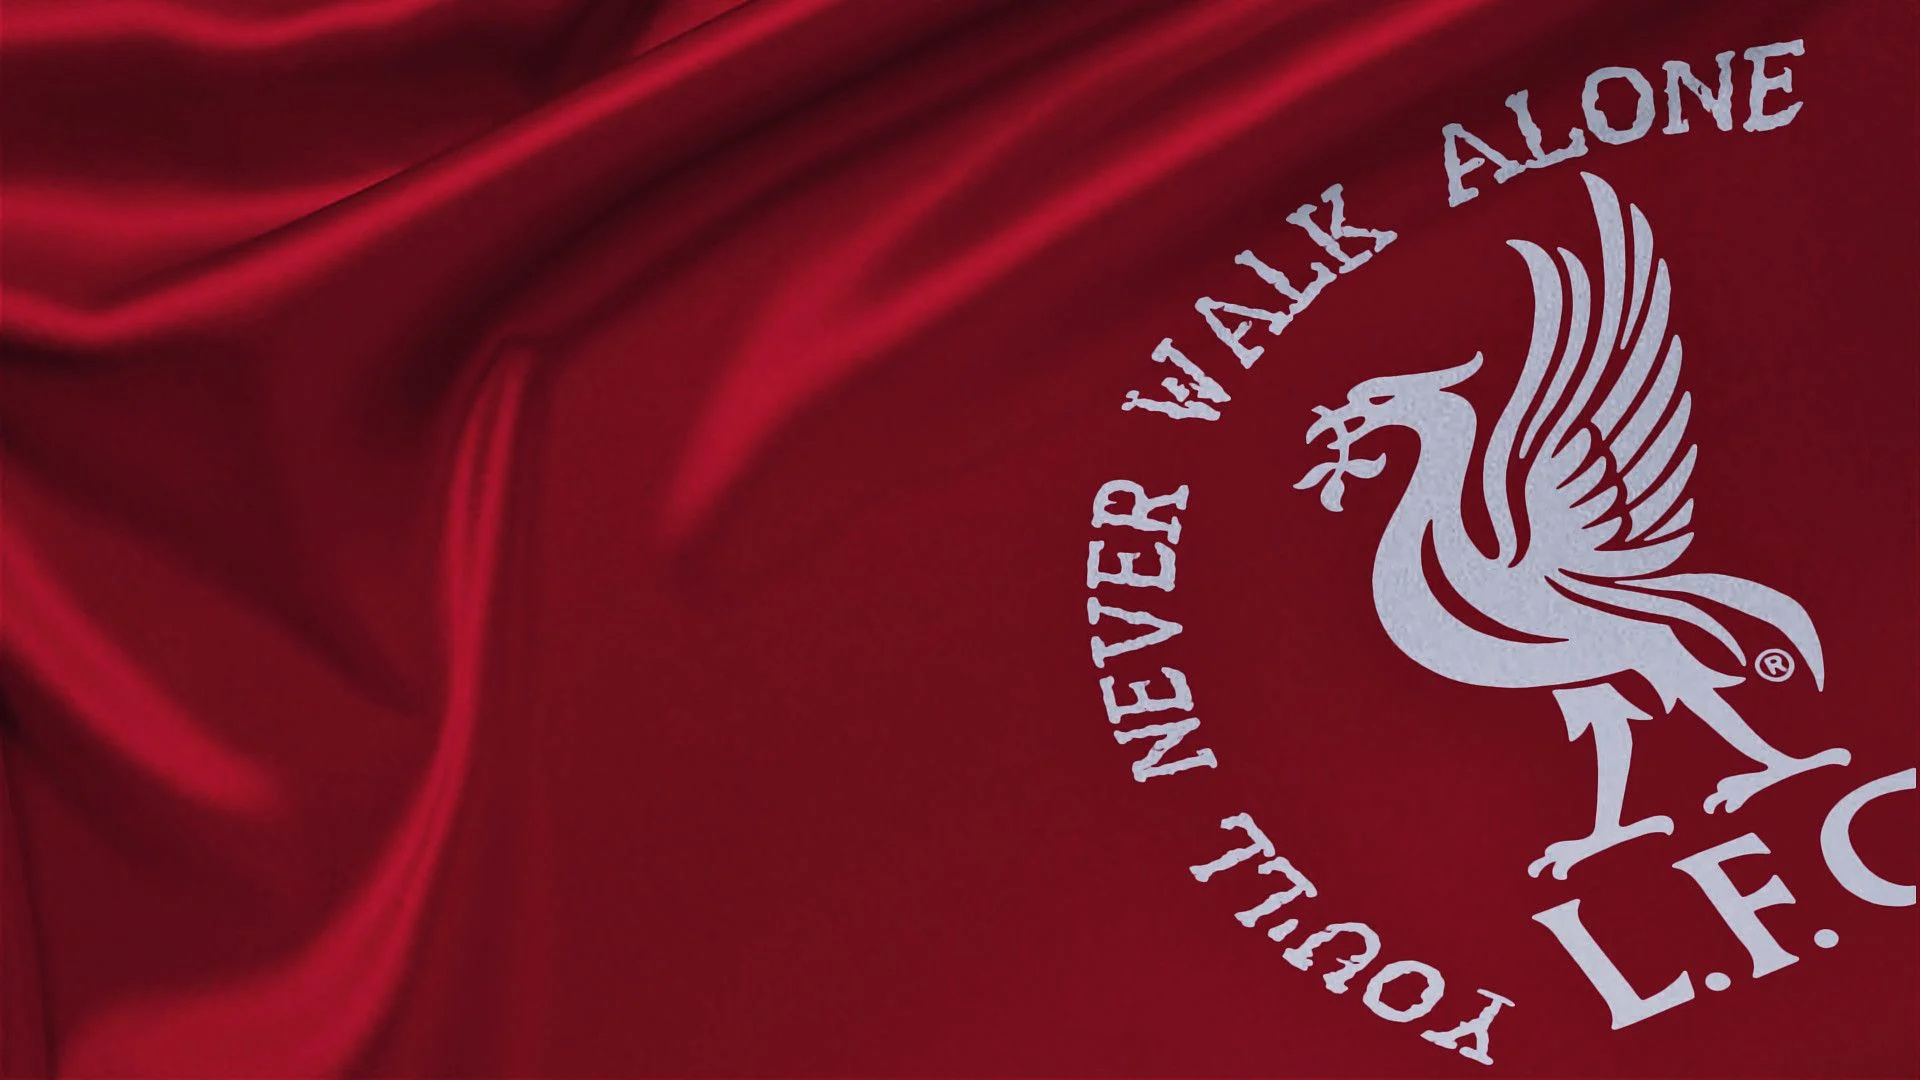 Liverpool Football Club: You'll Never Walk Alone, The anthem, Features on the crest and on the Shankly Gates. 1920x1080 Full HD Background.